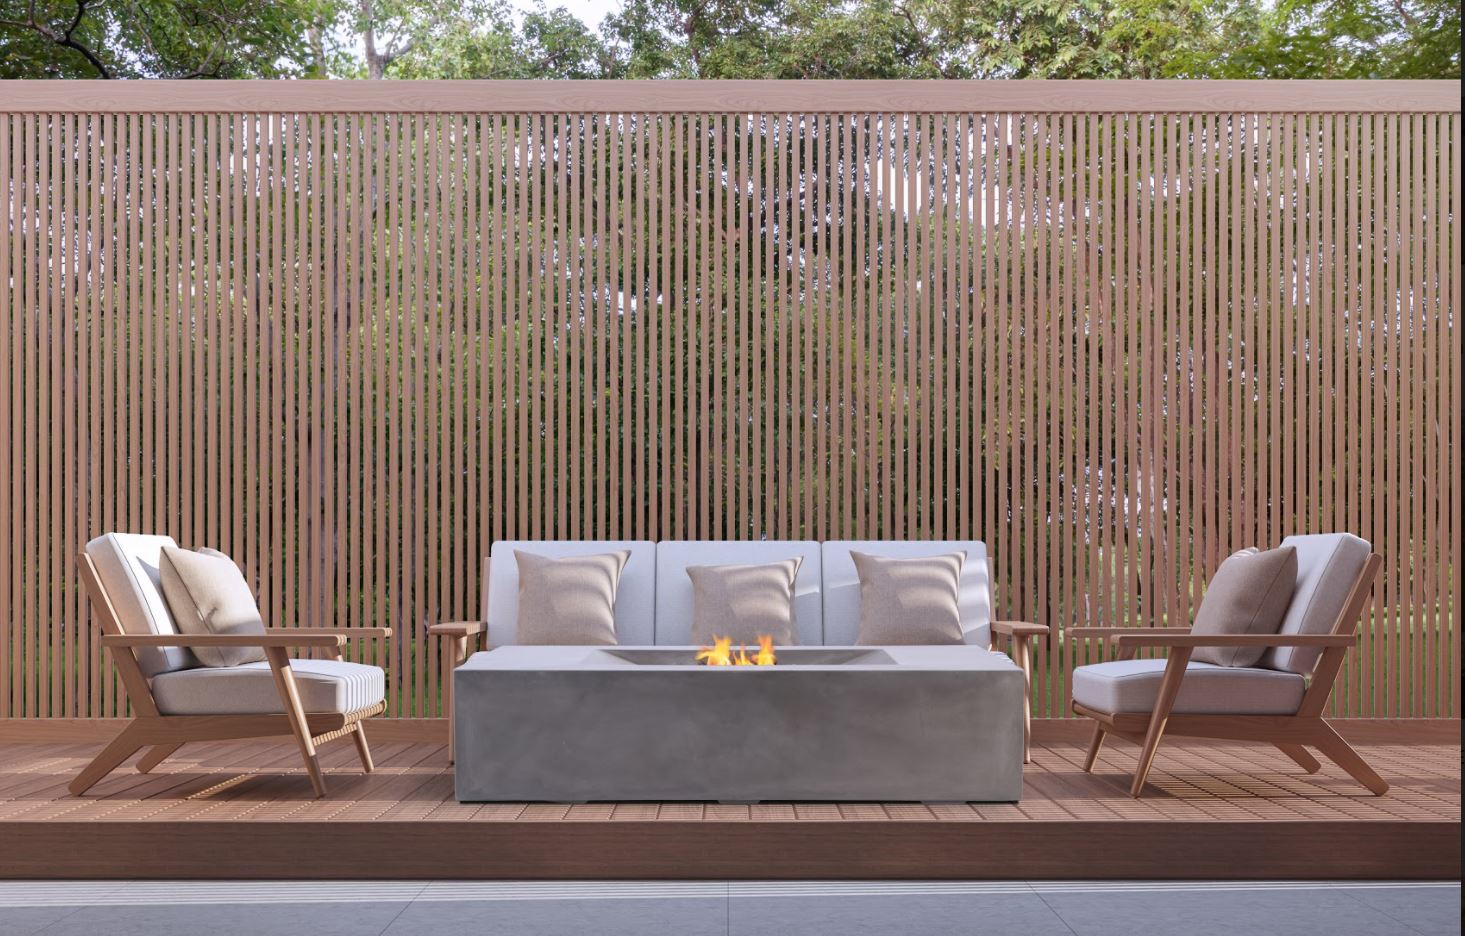 Are you looking to add some warmth and ambiance to your outdoor living space?